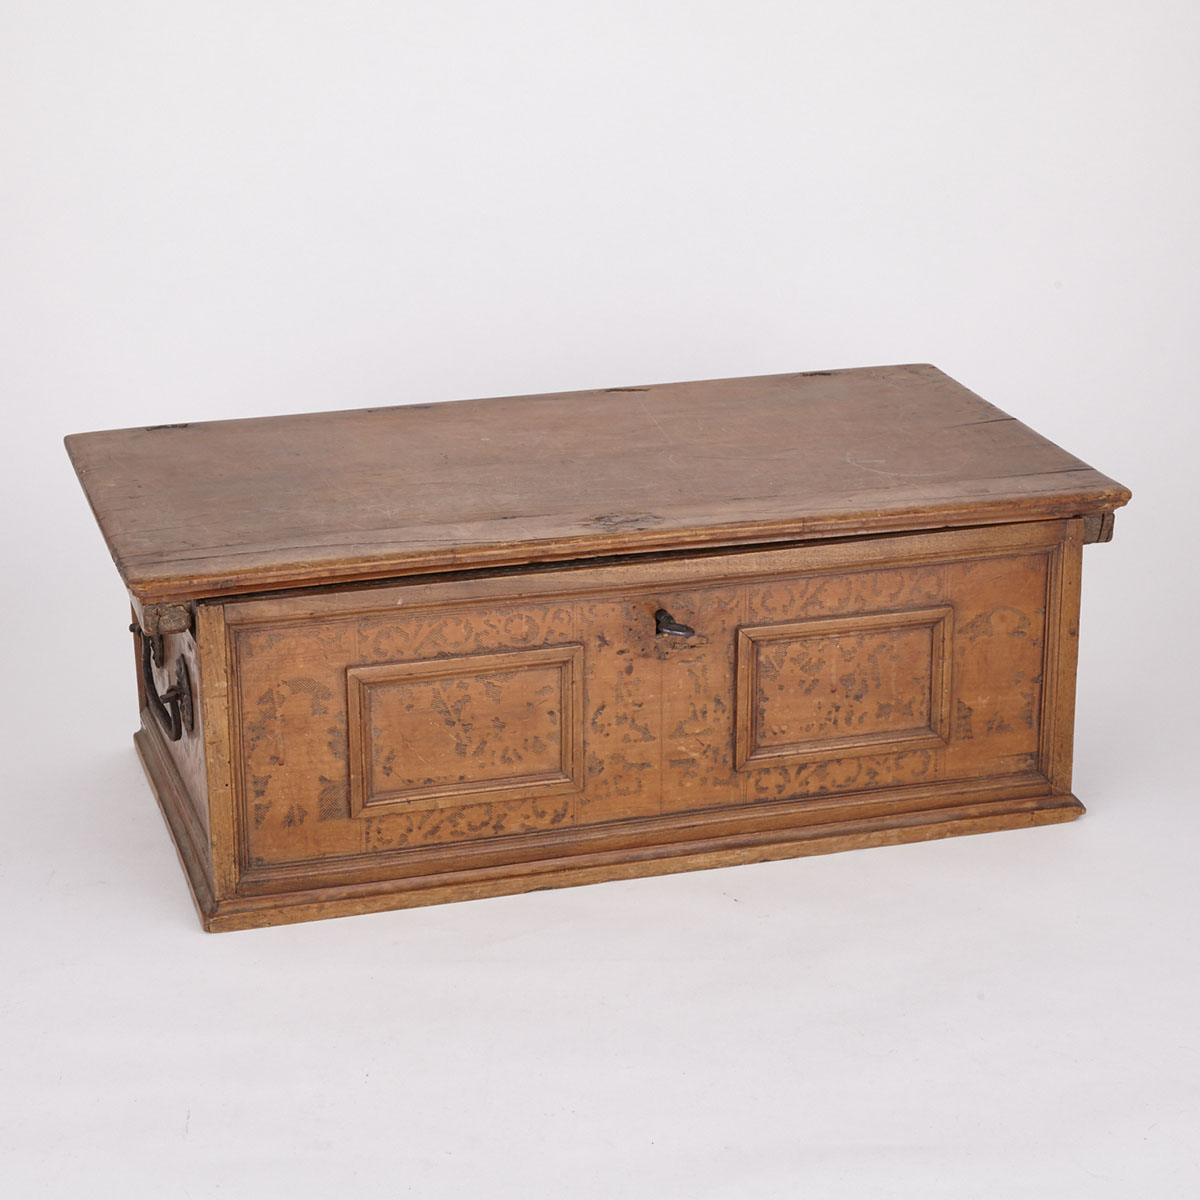 Continental Punch Decorated Walnut Chest, 18th century